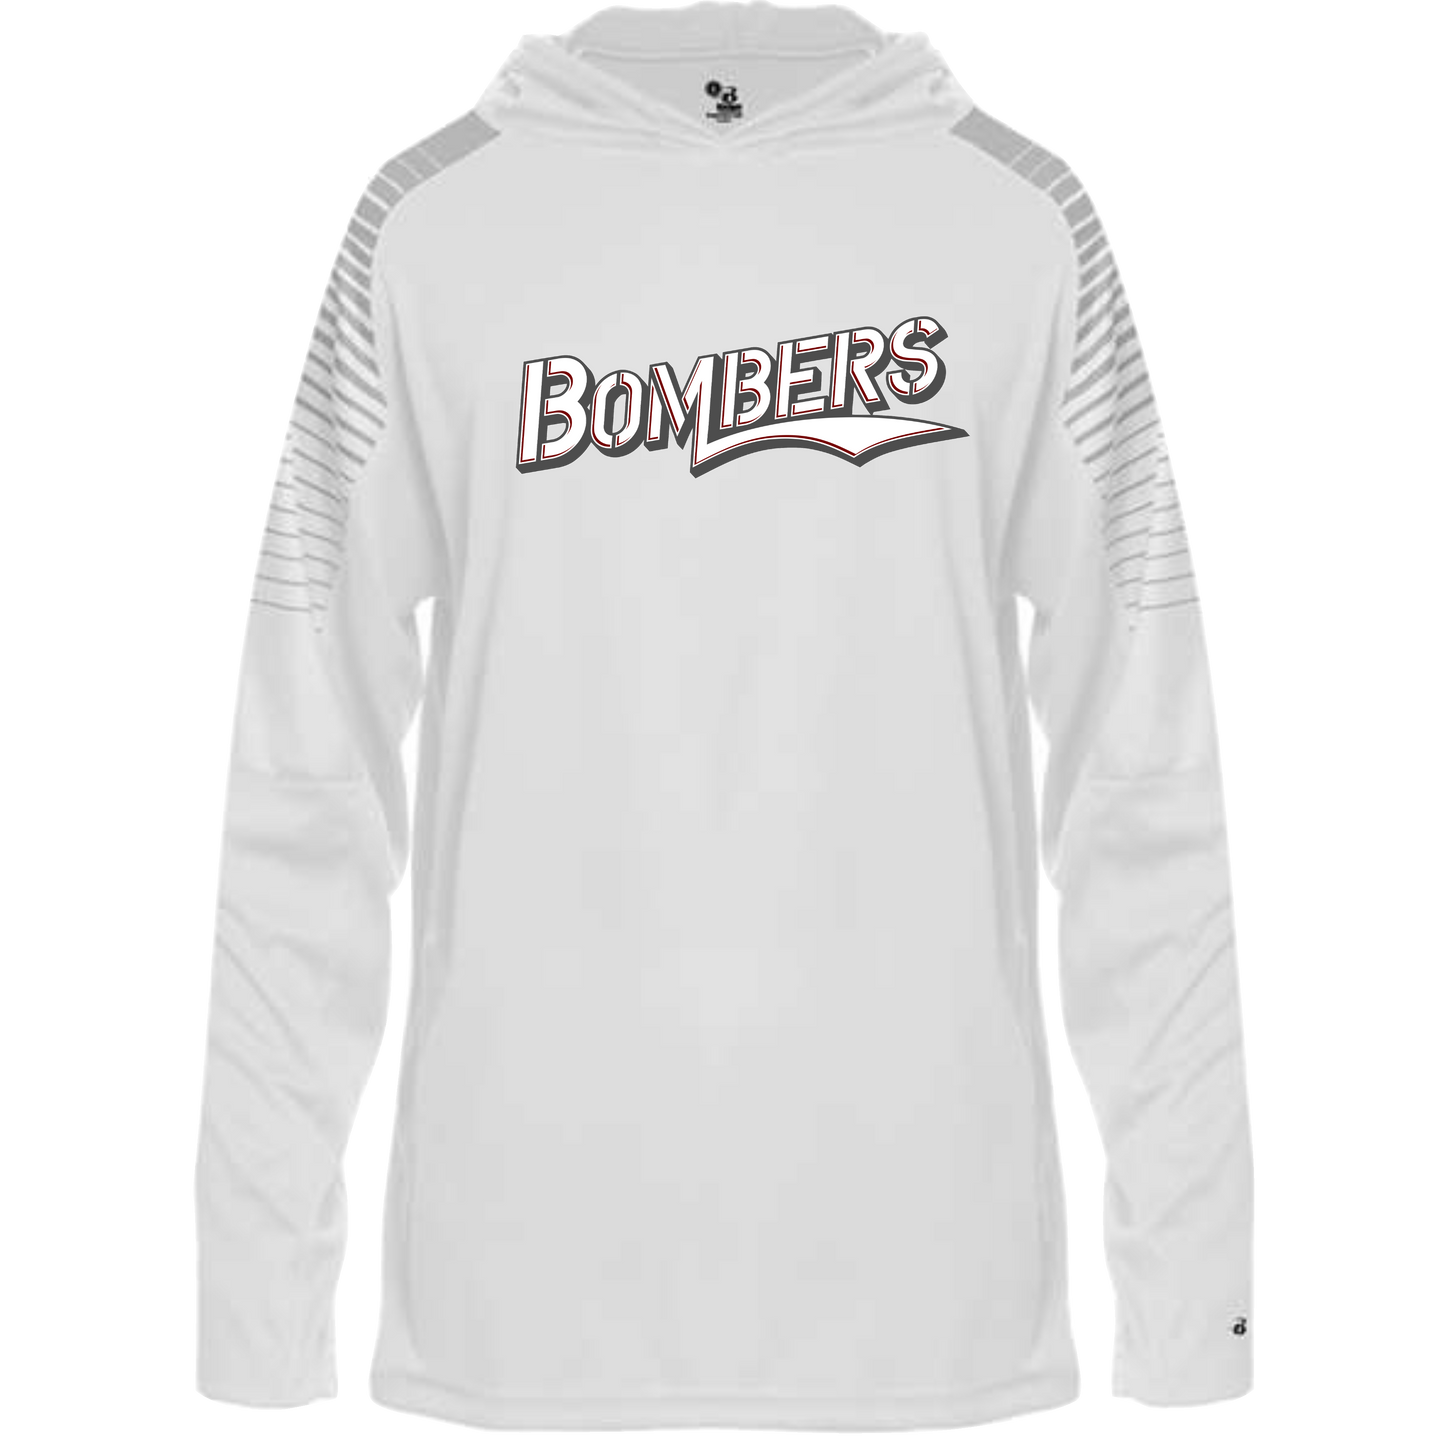 Badger - Lineup Hooded (LIGHTWEIGHT) Long Sleeve T-Shirt YOUTH/ADULT